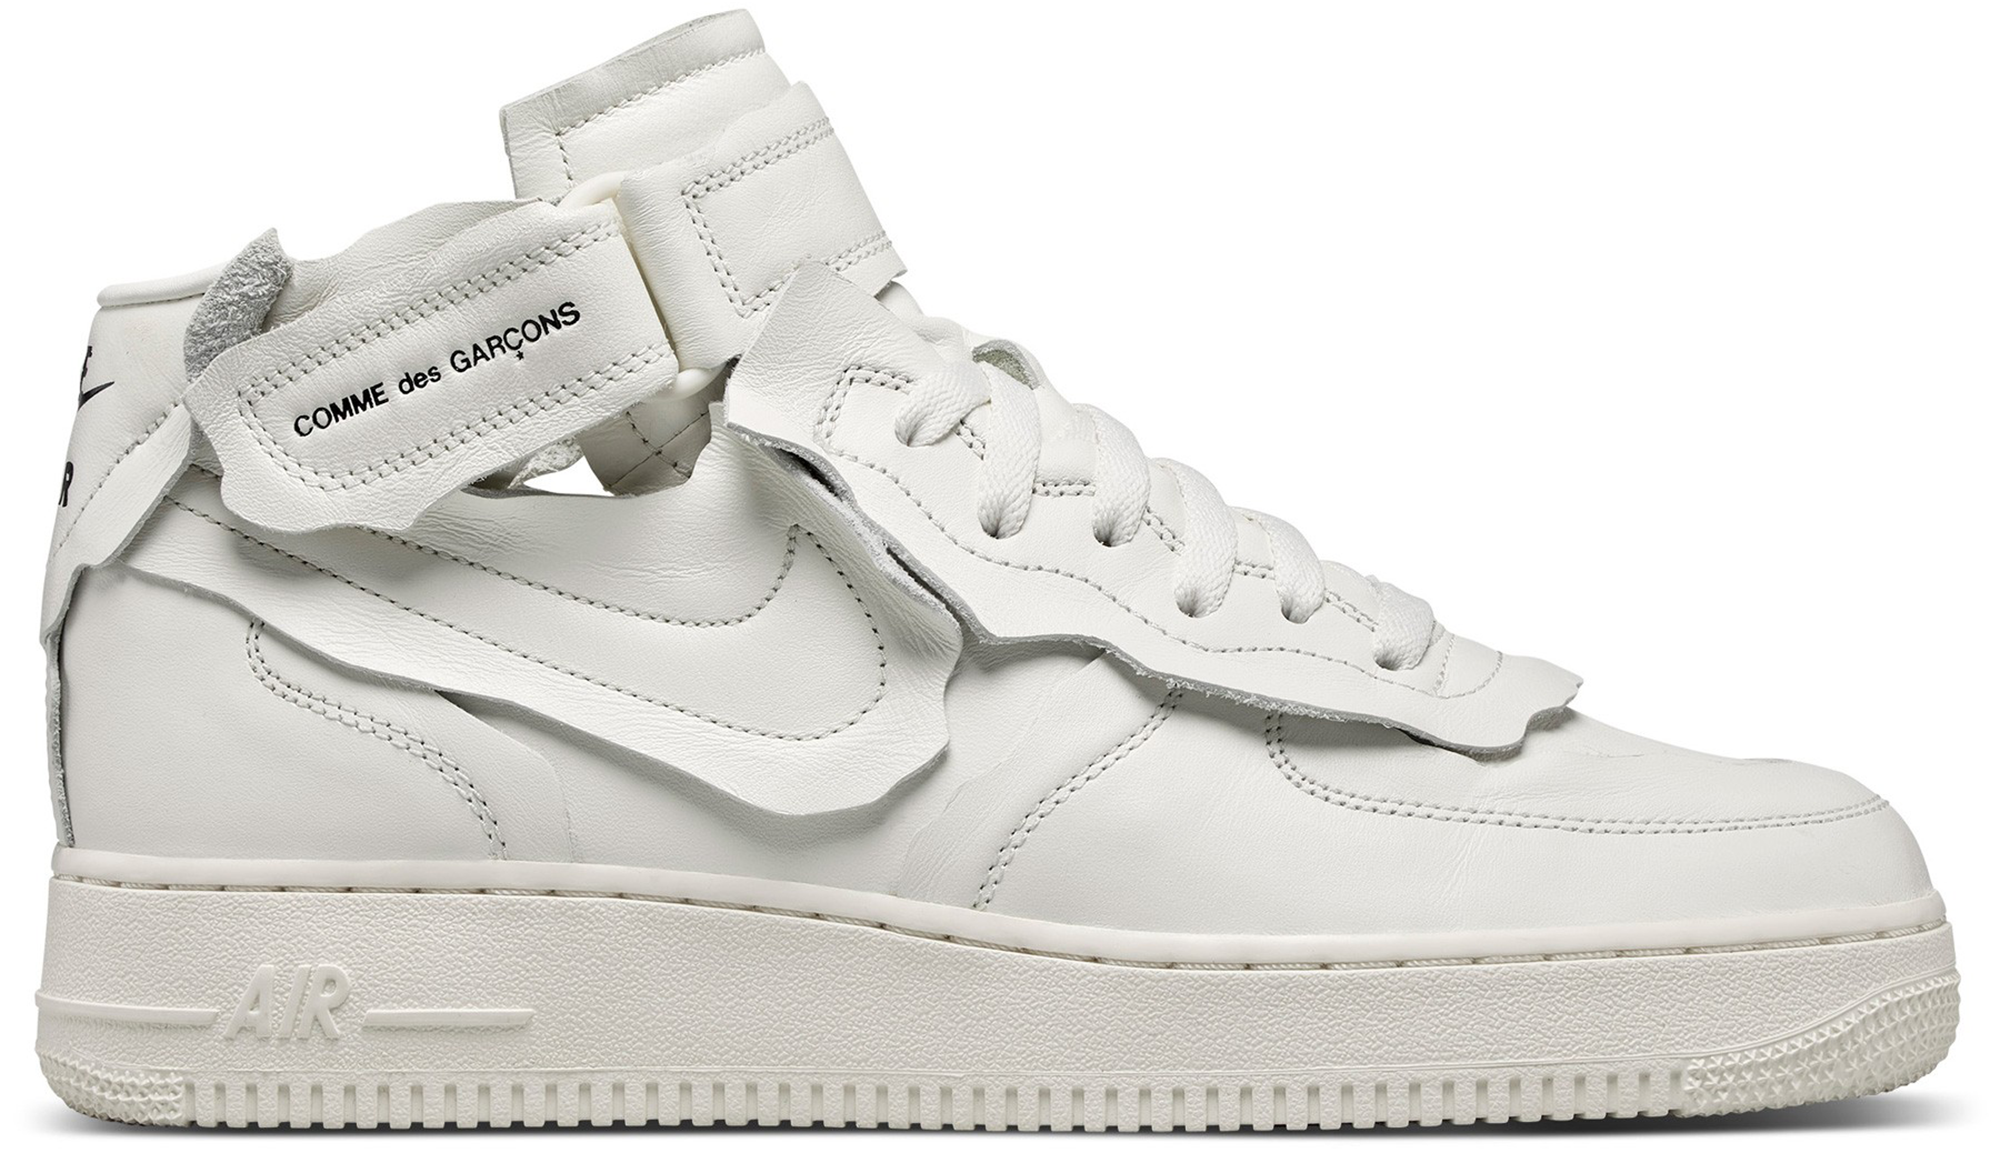 Nike Air Force 1 Mid Comme des Garcons White - DC3601-100